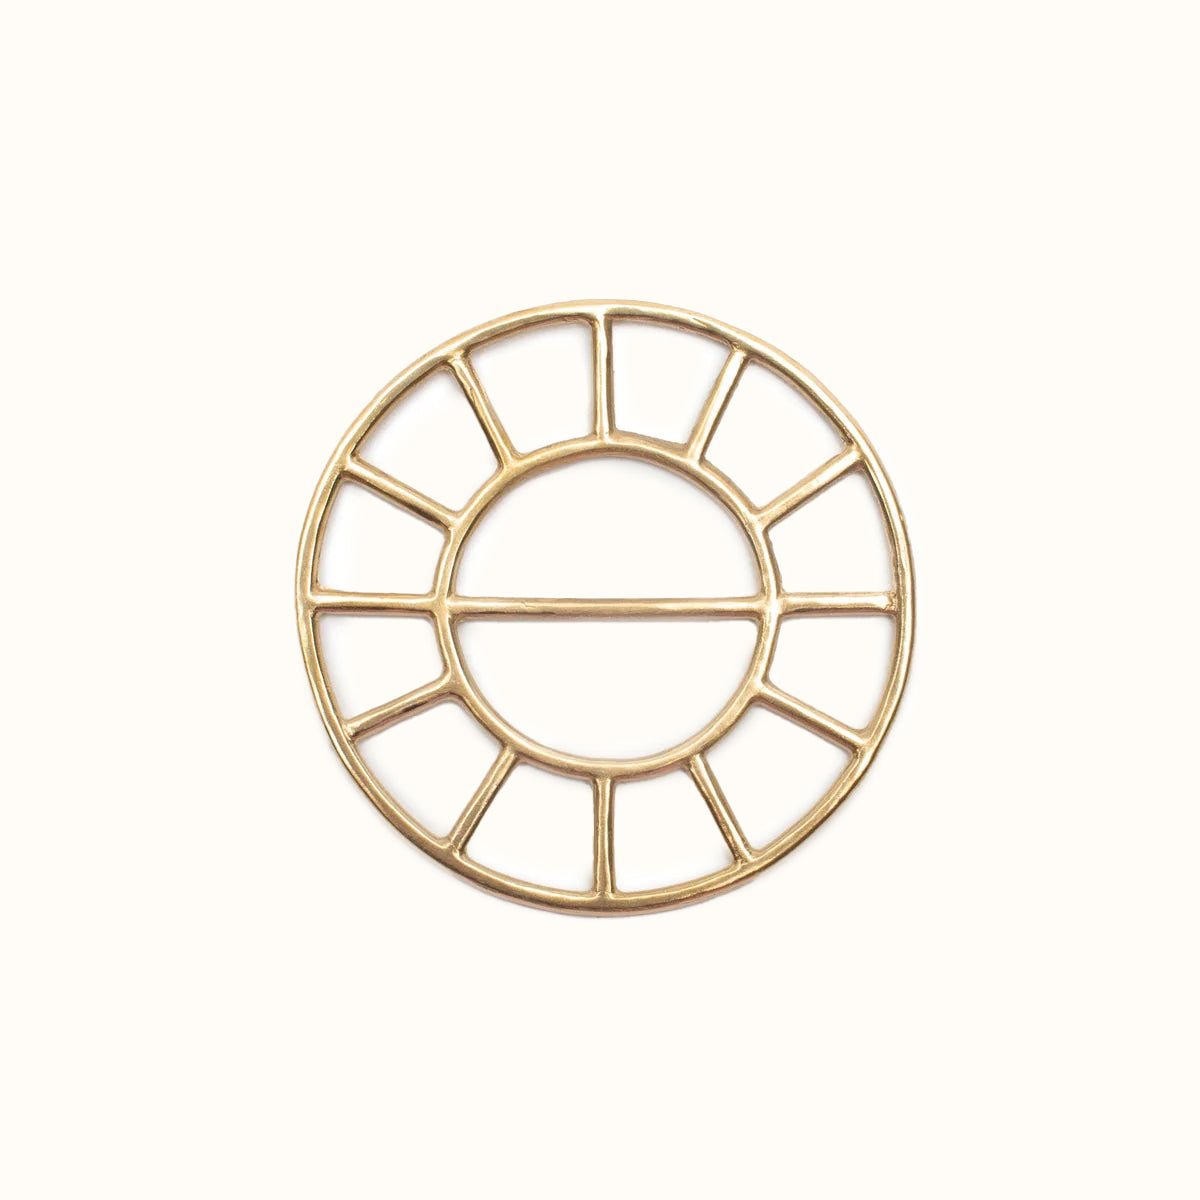 A circular brass scarf bolo. The Scarf Bolo is designed and handmade by Take Shape Studio in Berkeley, California.